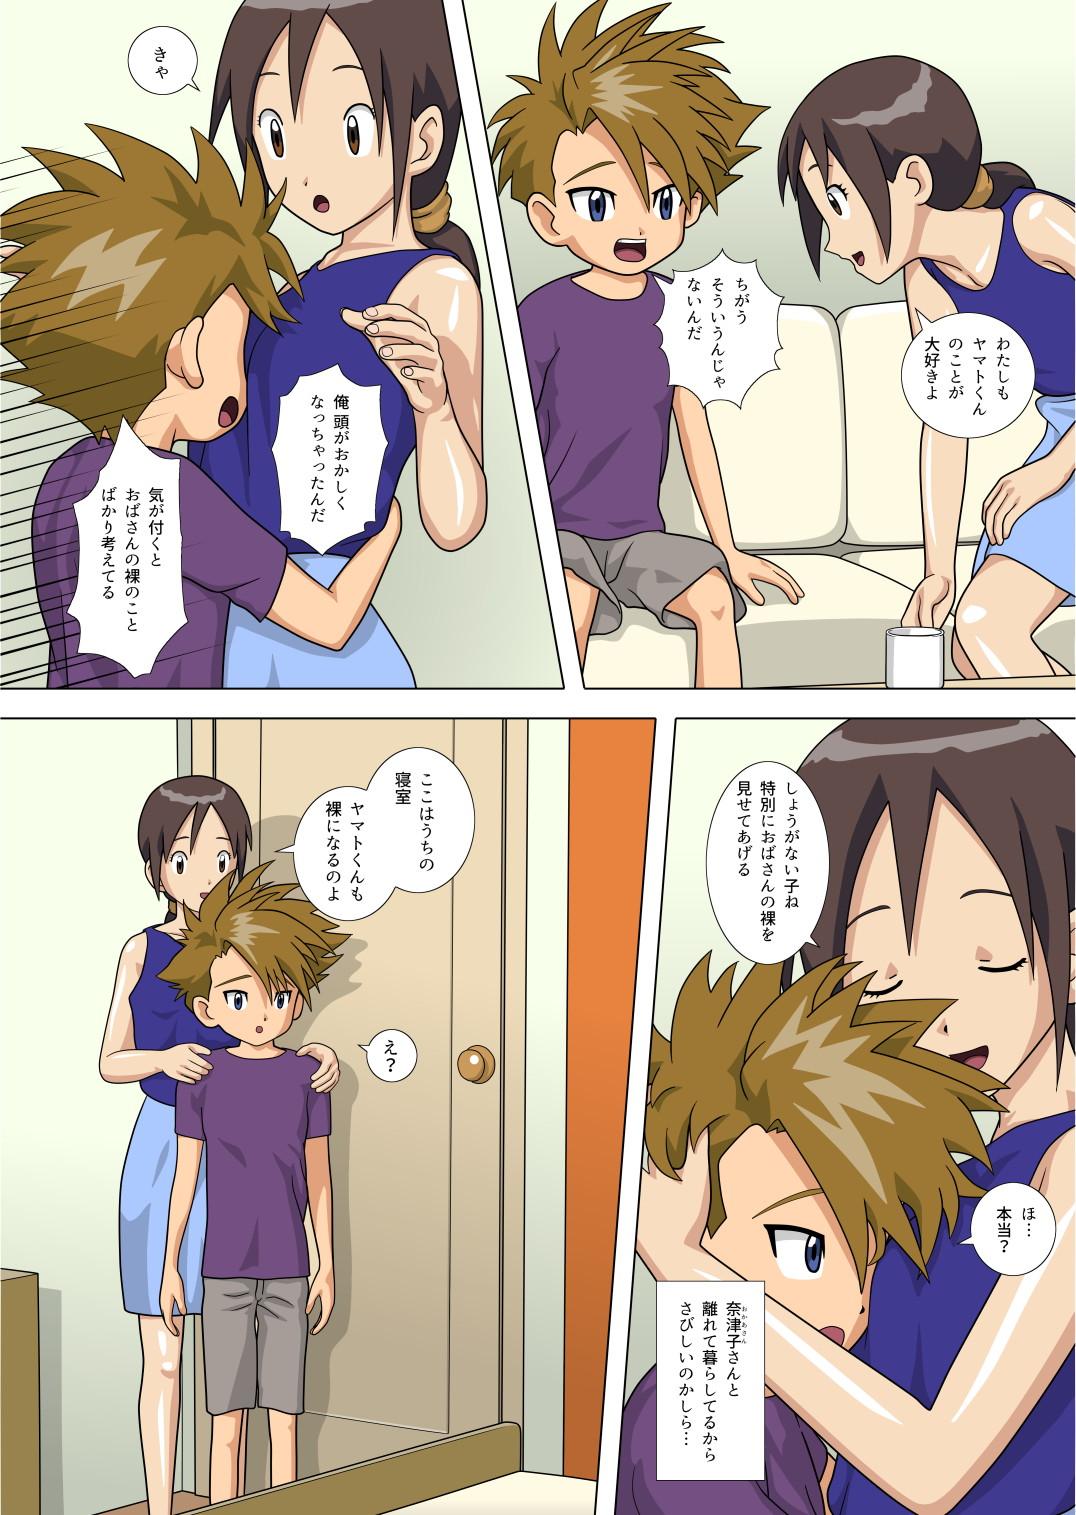 Turkish Friend's mother teaches me how to sex. - Digimon adventure Digimon Ginger - Page 3